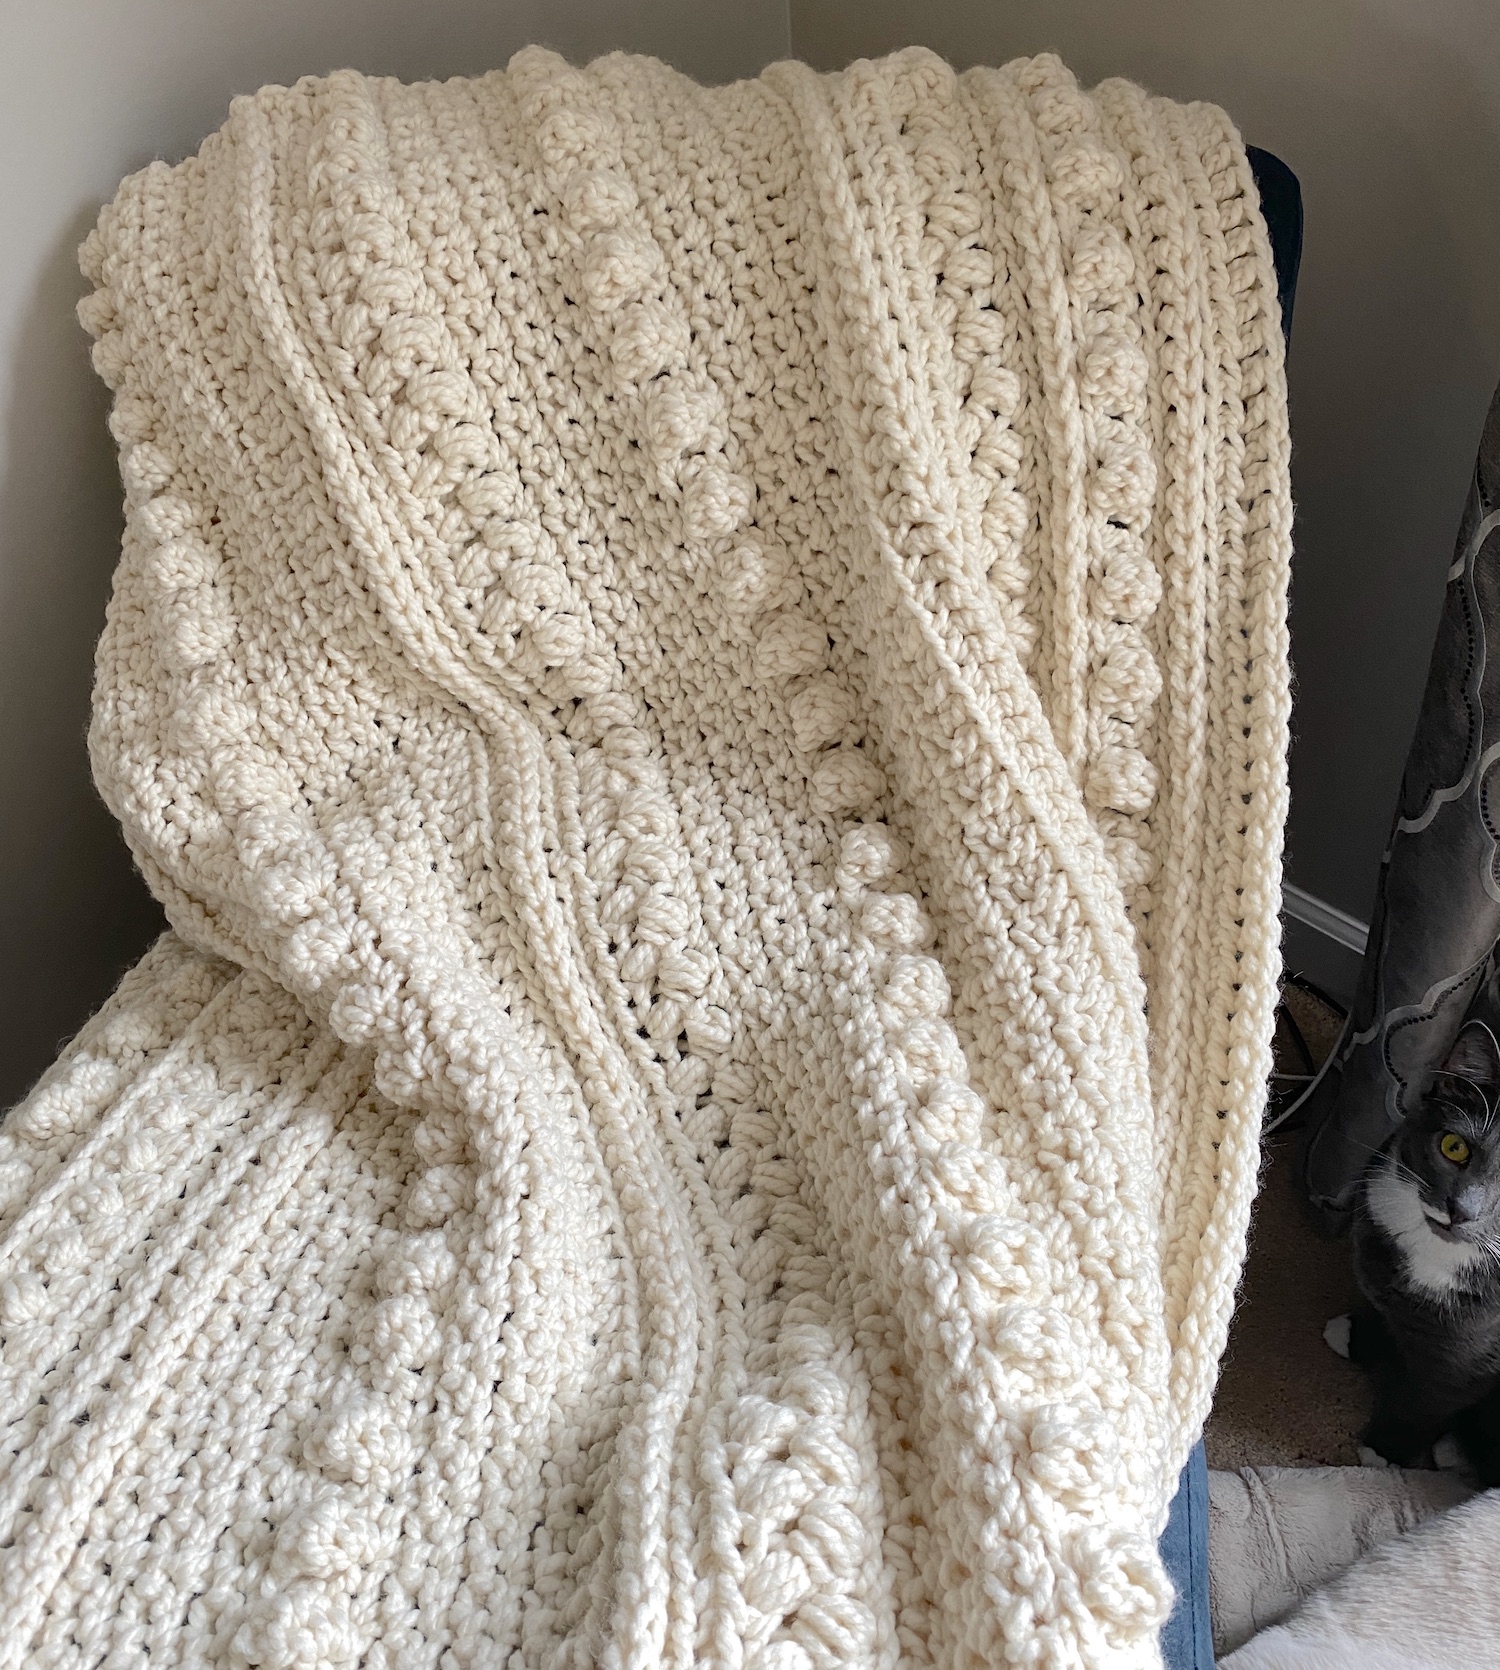 Is this the terrible way everyone else tries to find the end inside or am I  just an idiot? : r/crochet